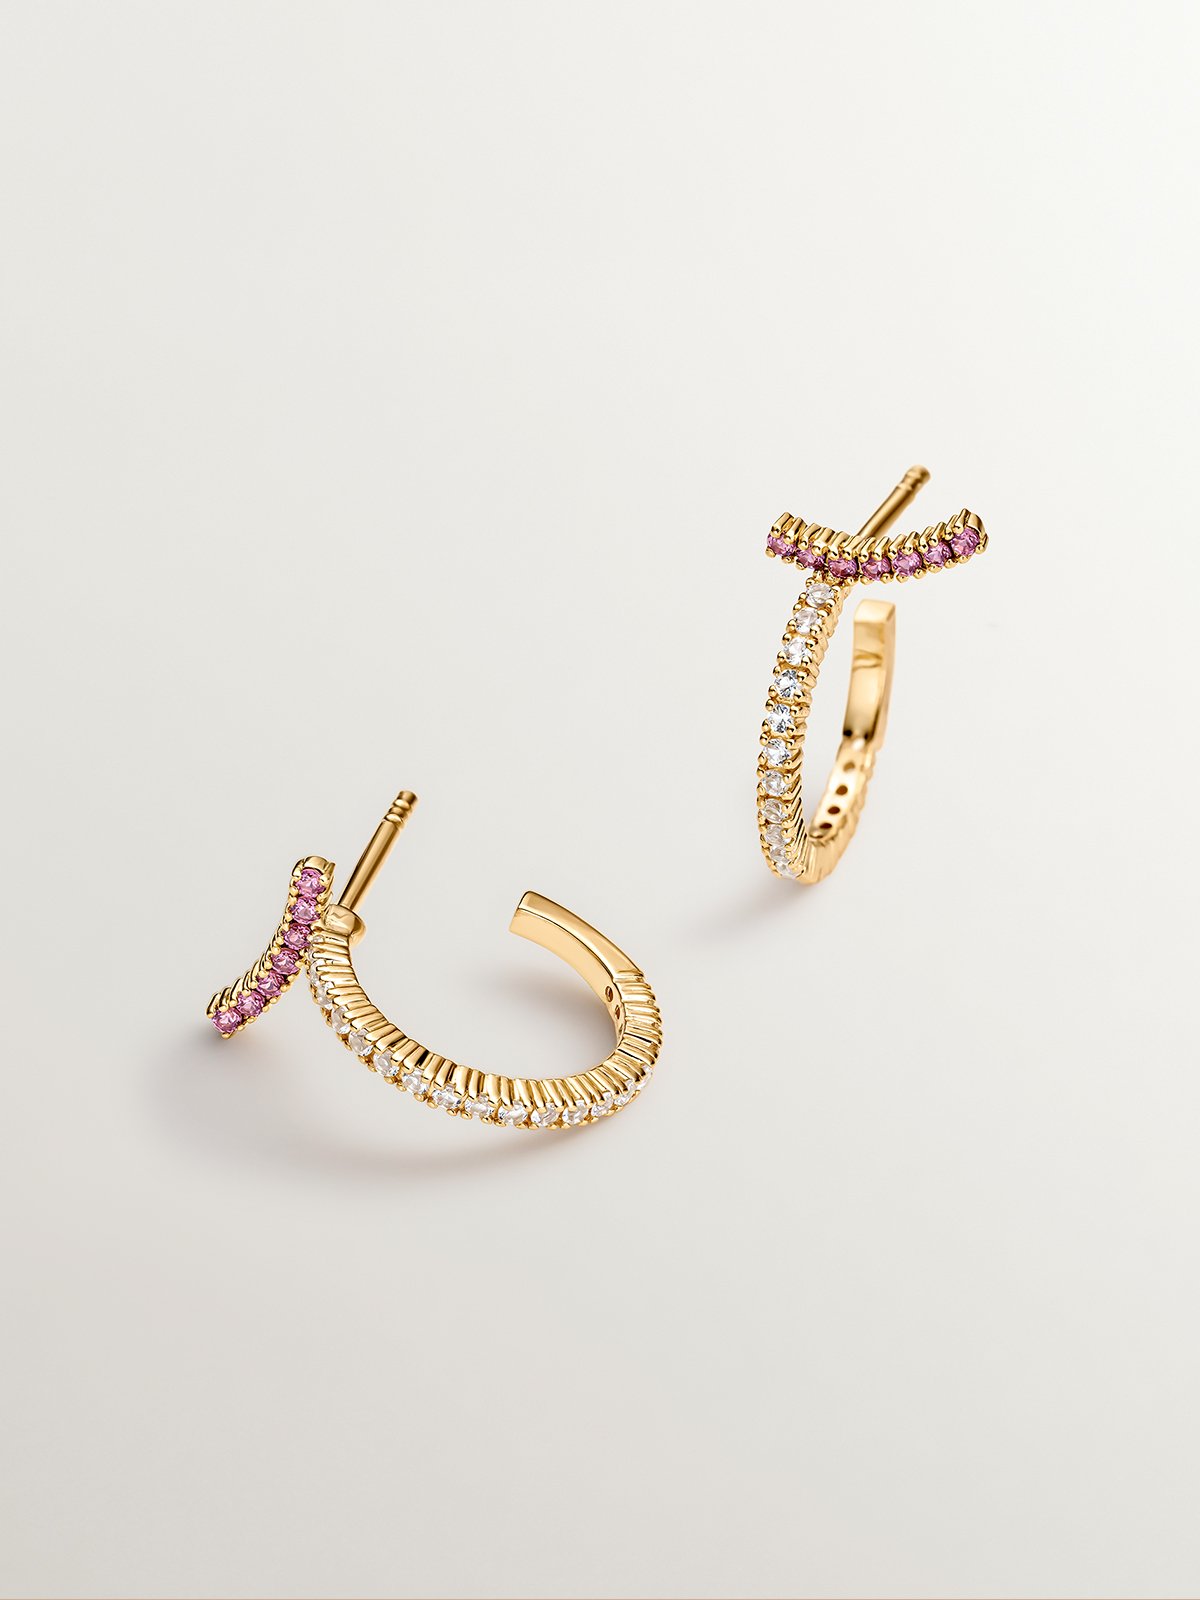 Small hoop earrings made of 925 silver, coated in 18K yellow gold with white topaz and pink rhodolites.